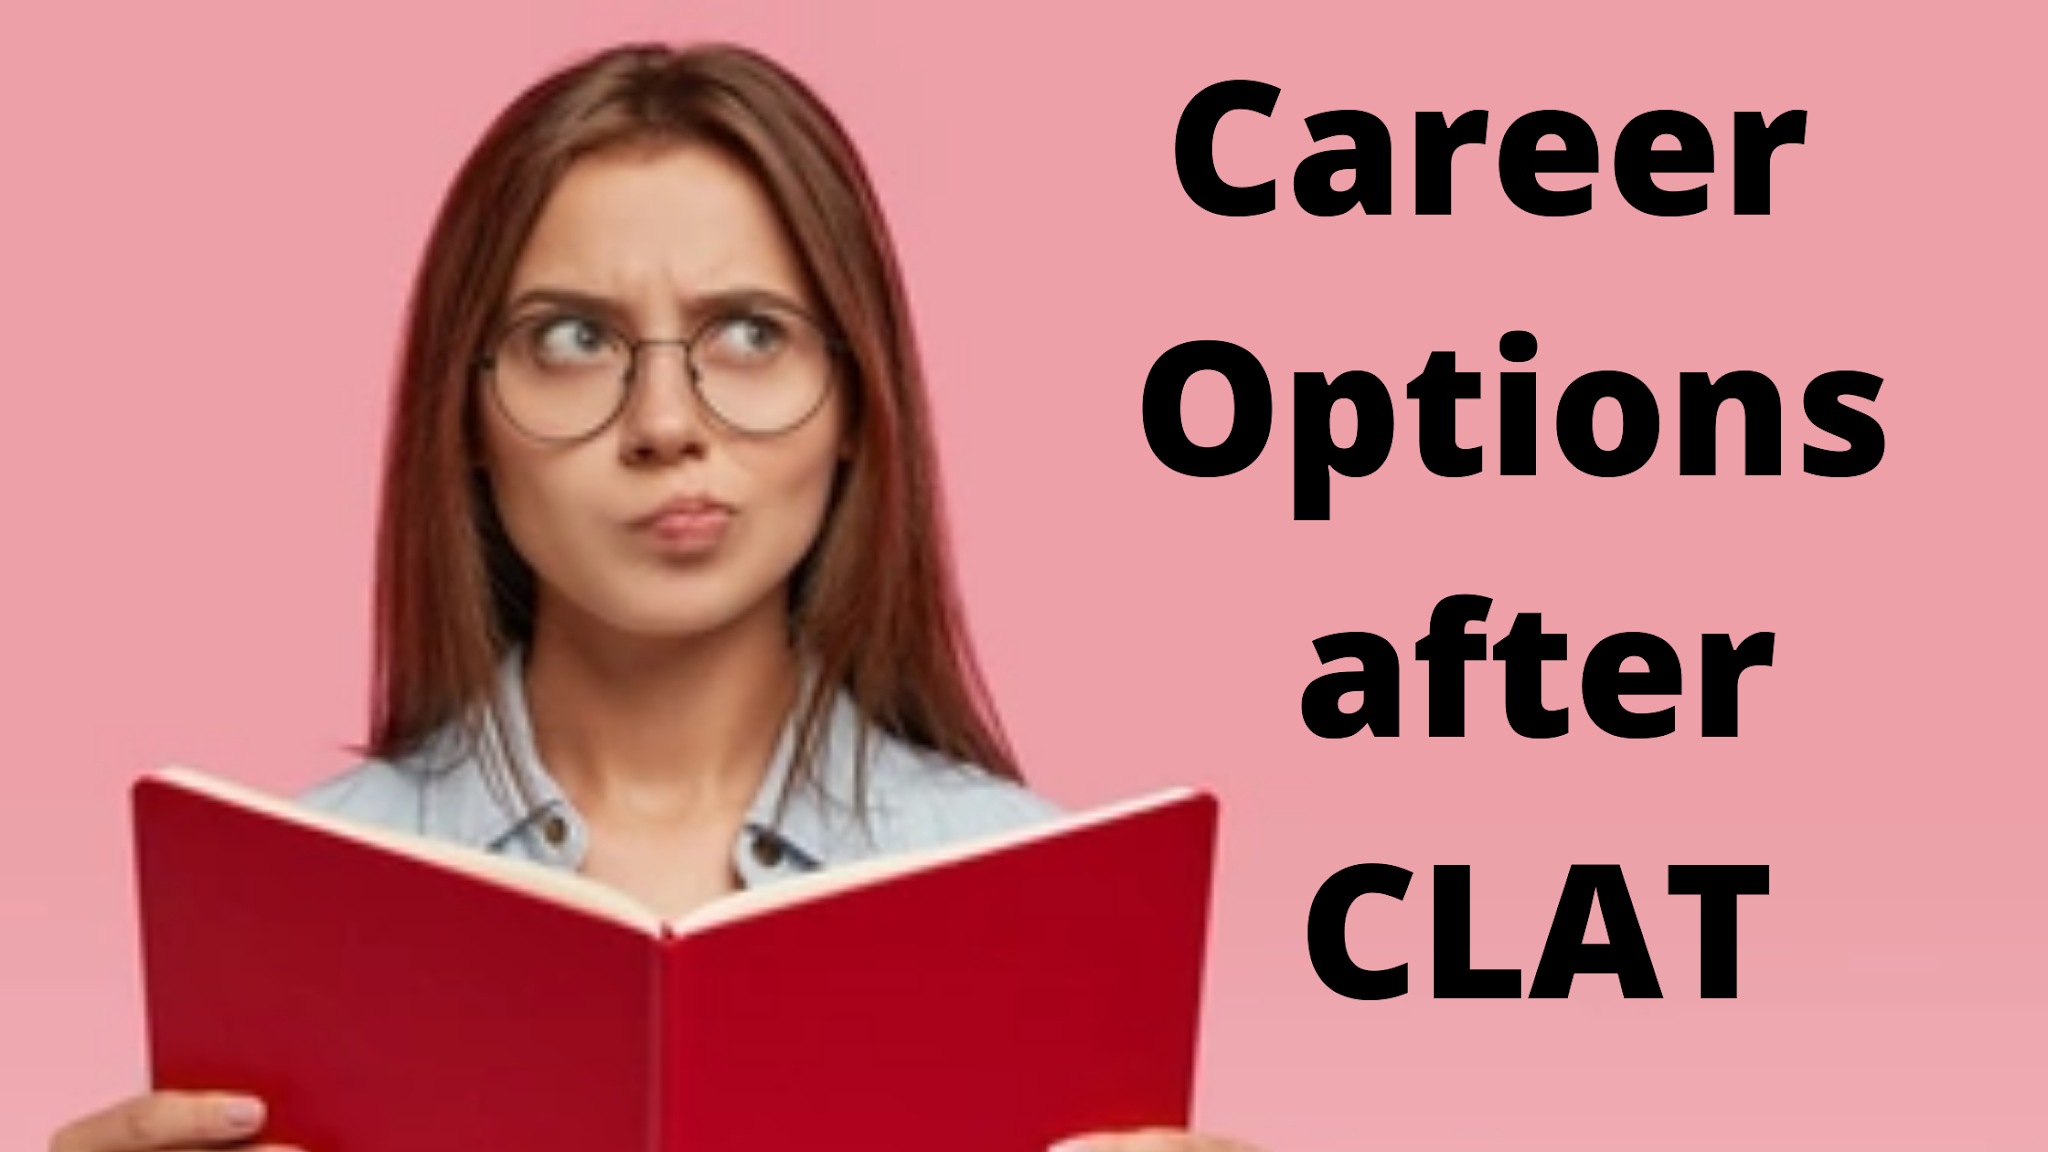 Career options after CLAT